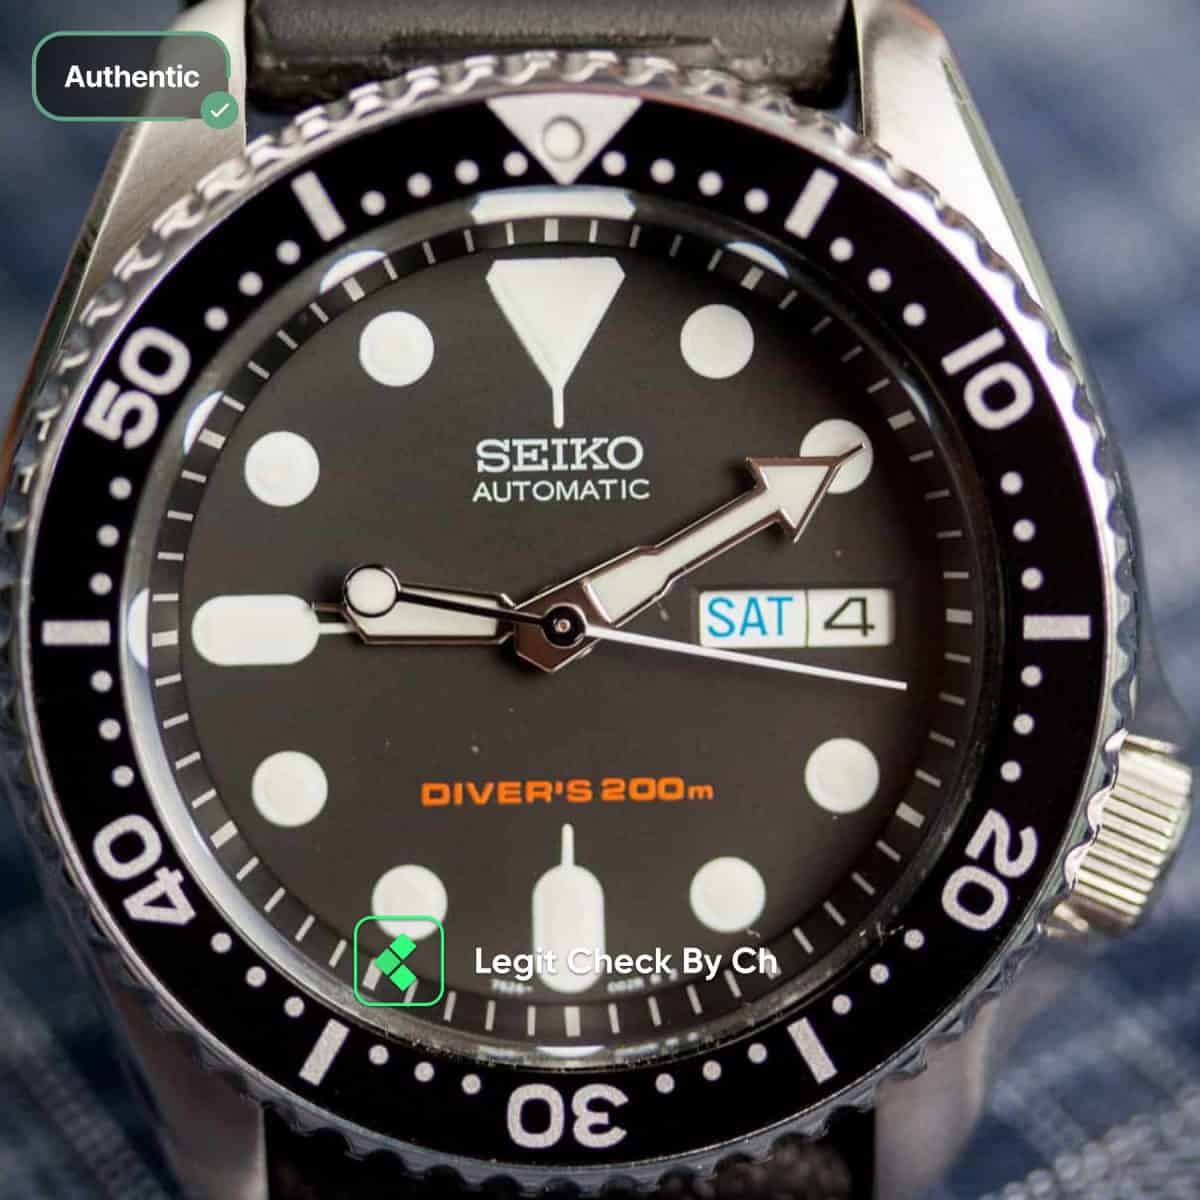 how to authenticate my seiko skx